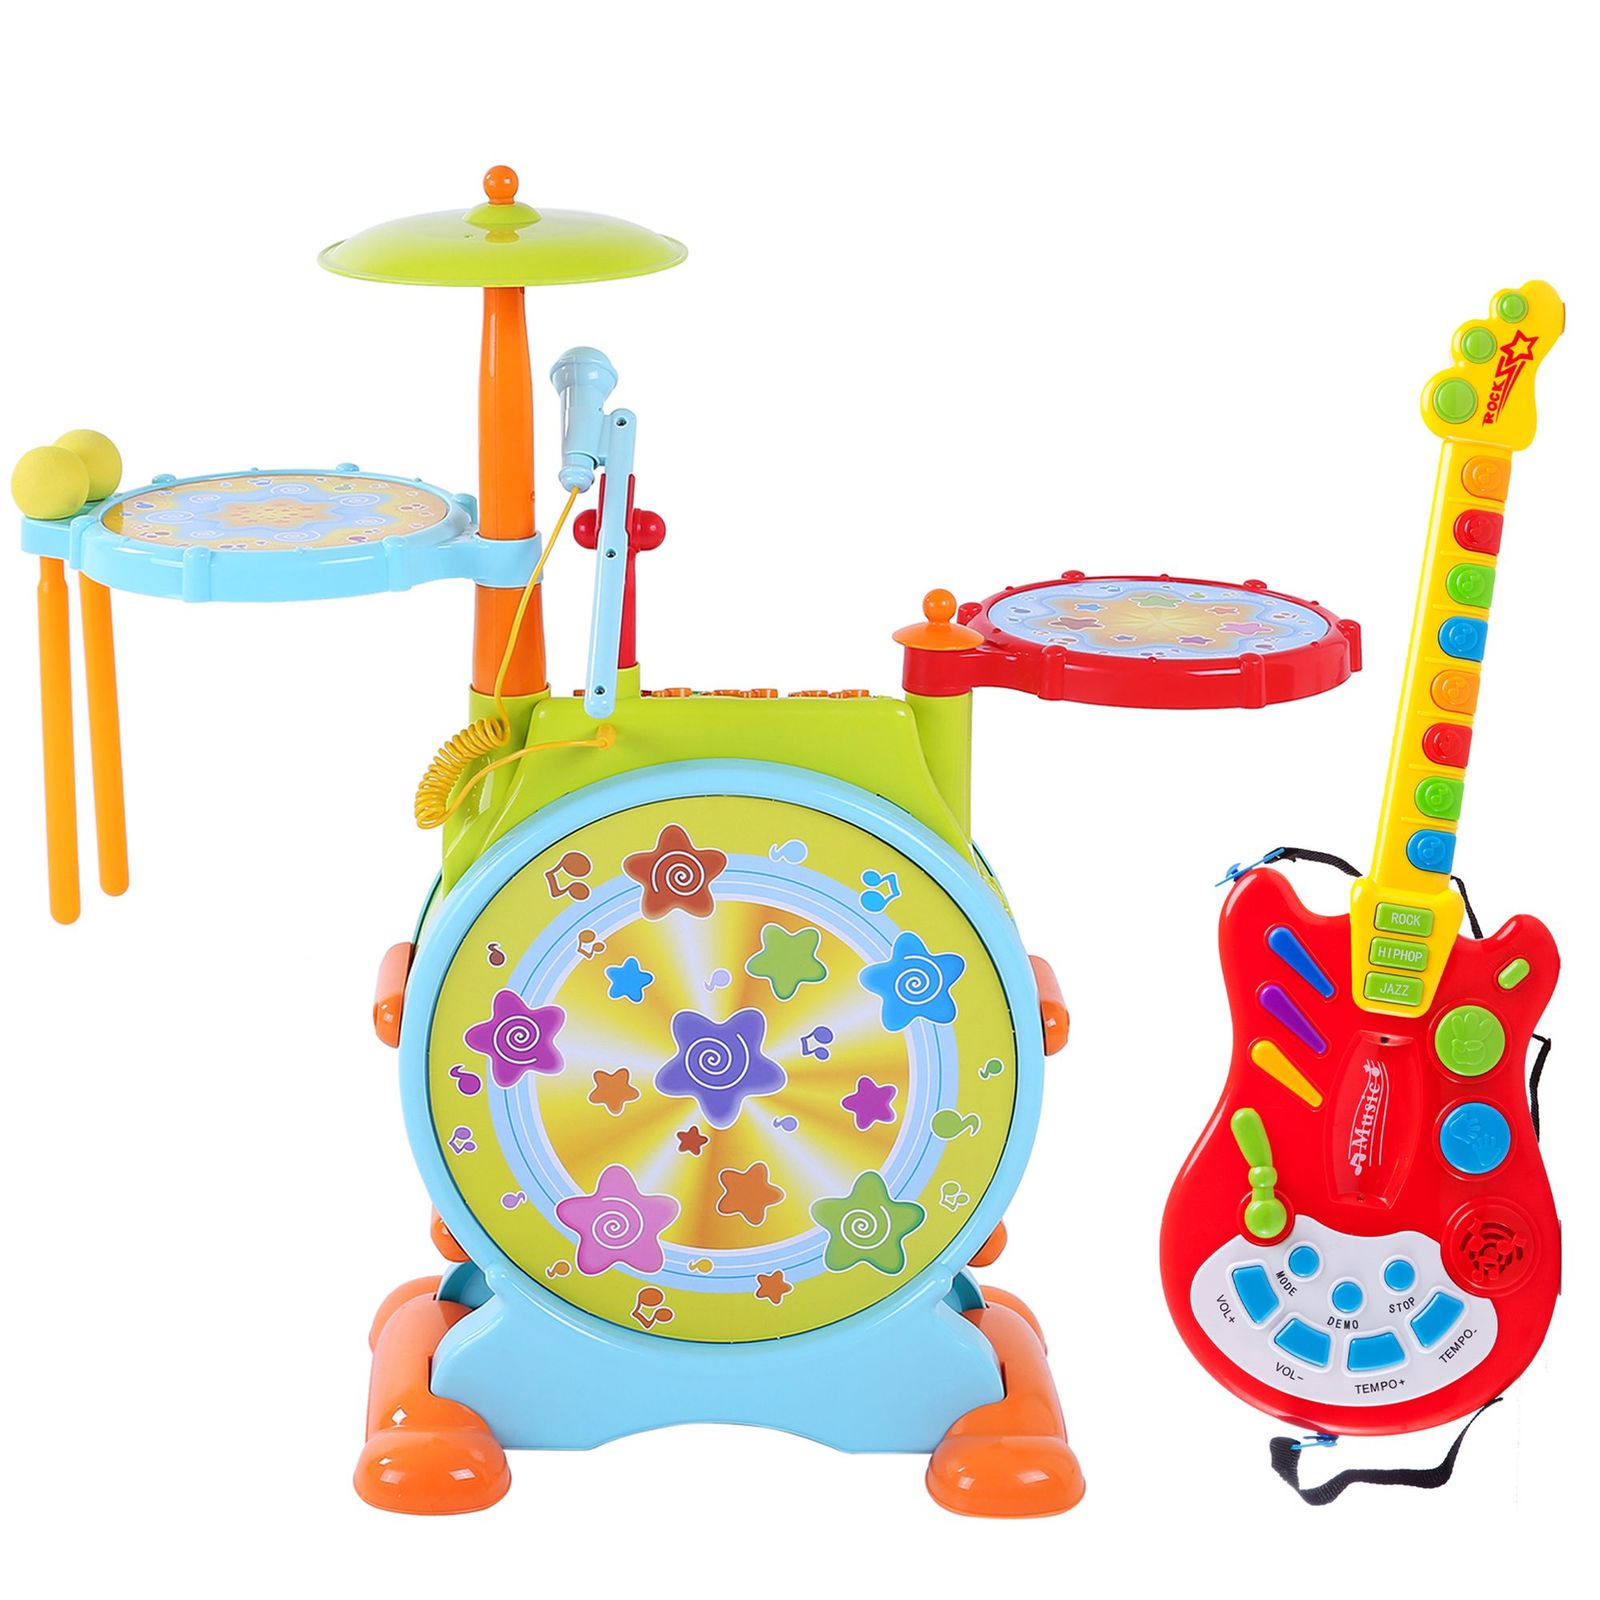 Dimple Toy Electric Guitar with Electric Big Toy Drum Set Gift for Kids, Toddler